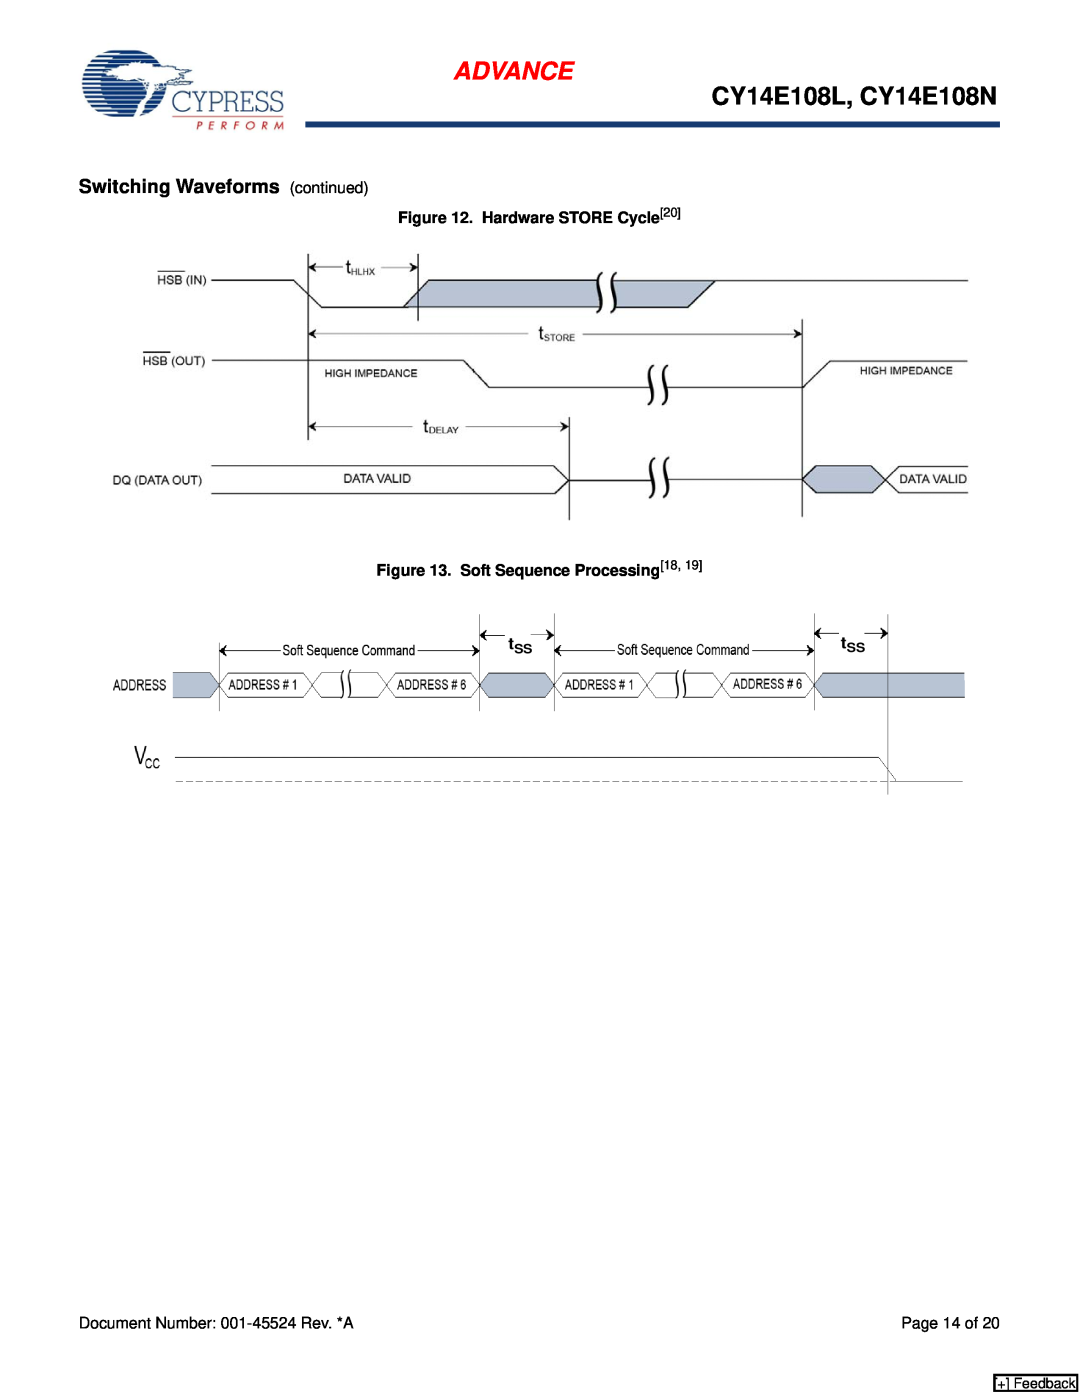 Cypress CY14B102N manual Advance, CY14E108L, CY14E108N, Switching Waveforms continued, Hardware STORE Cycle20, Page 14 of 